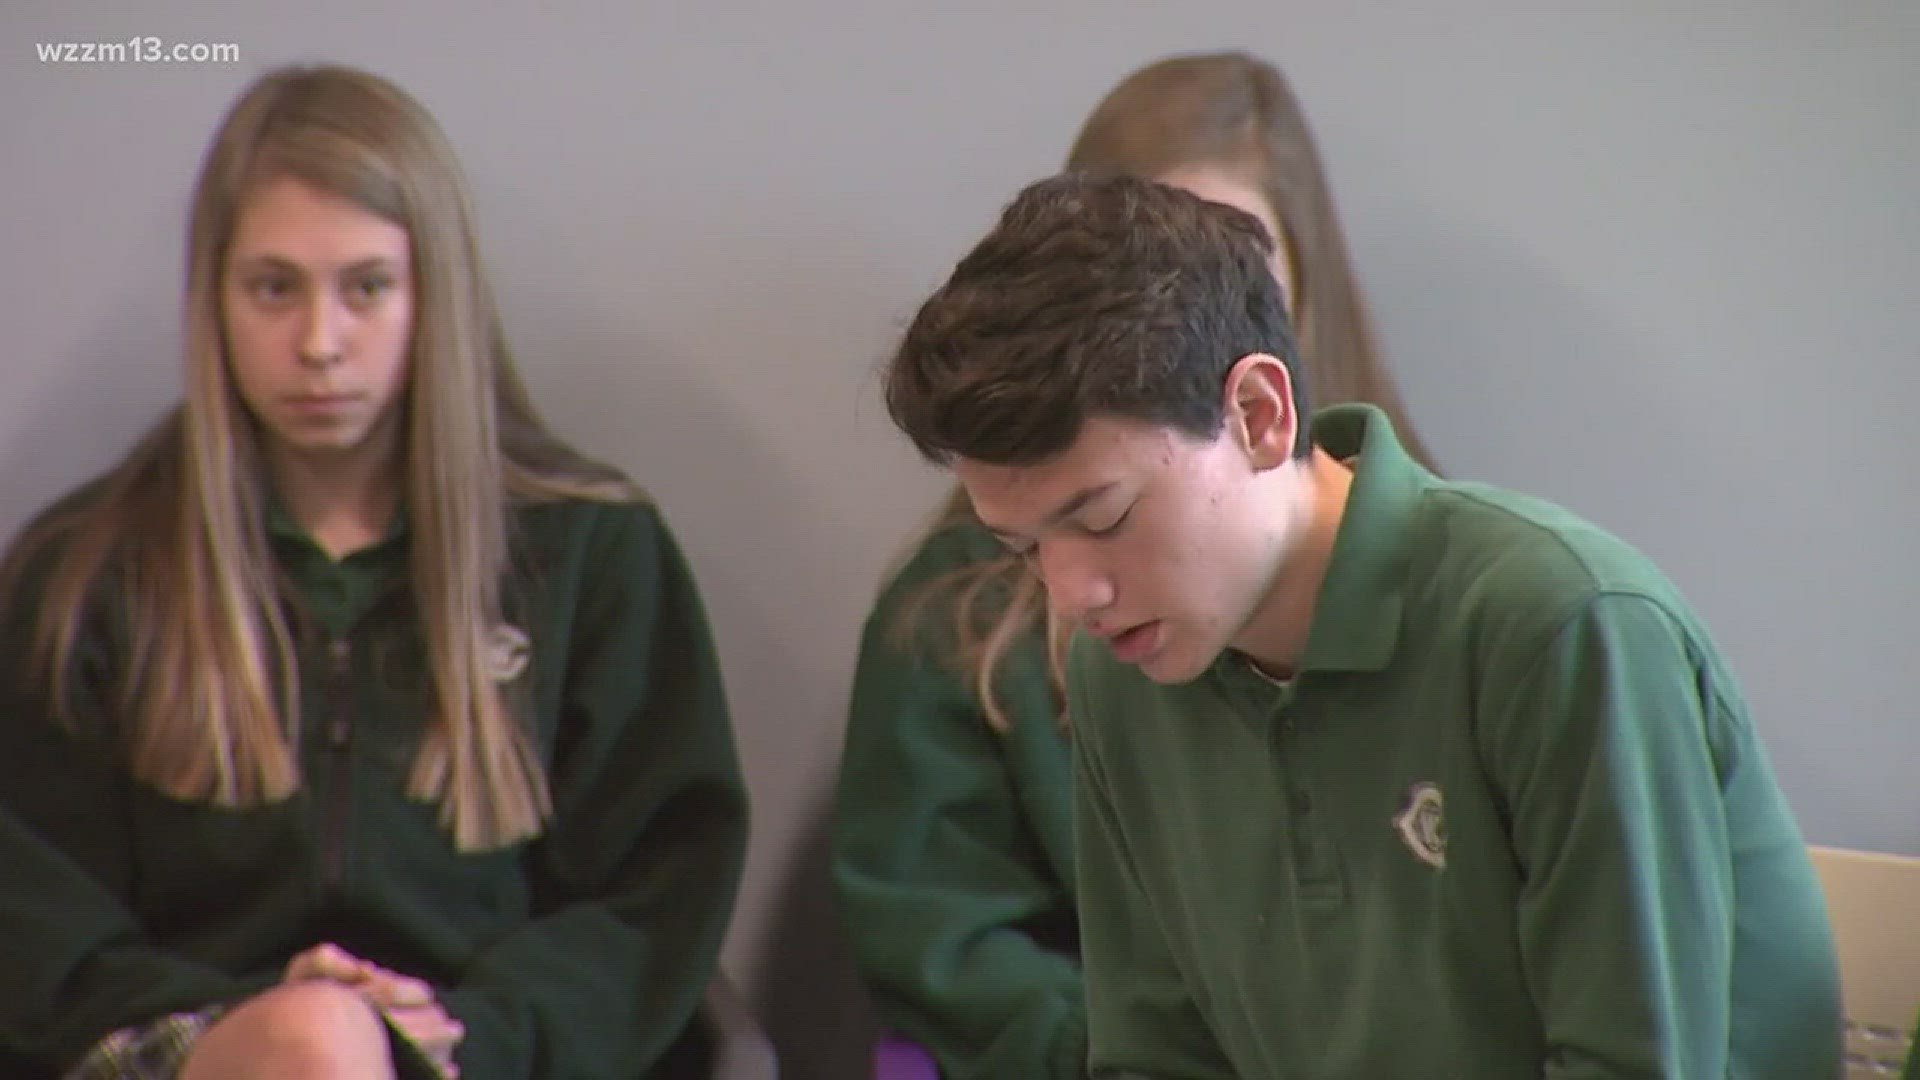 West Catholic students take part in 'walk in'